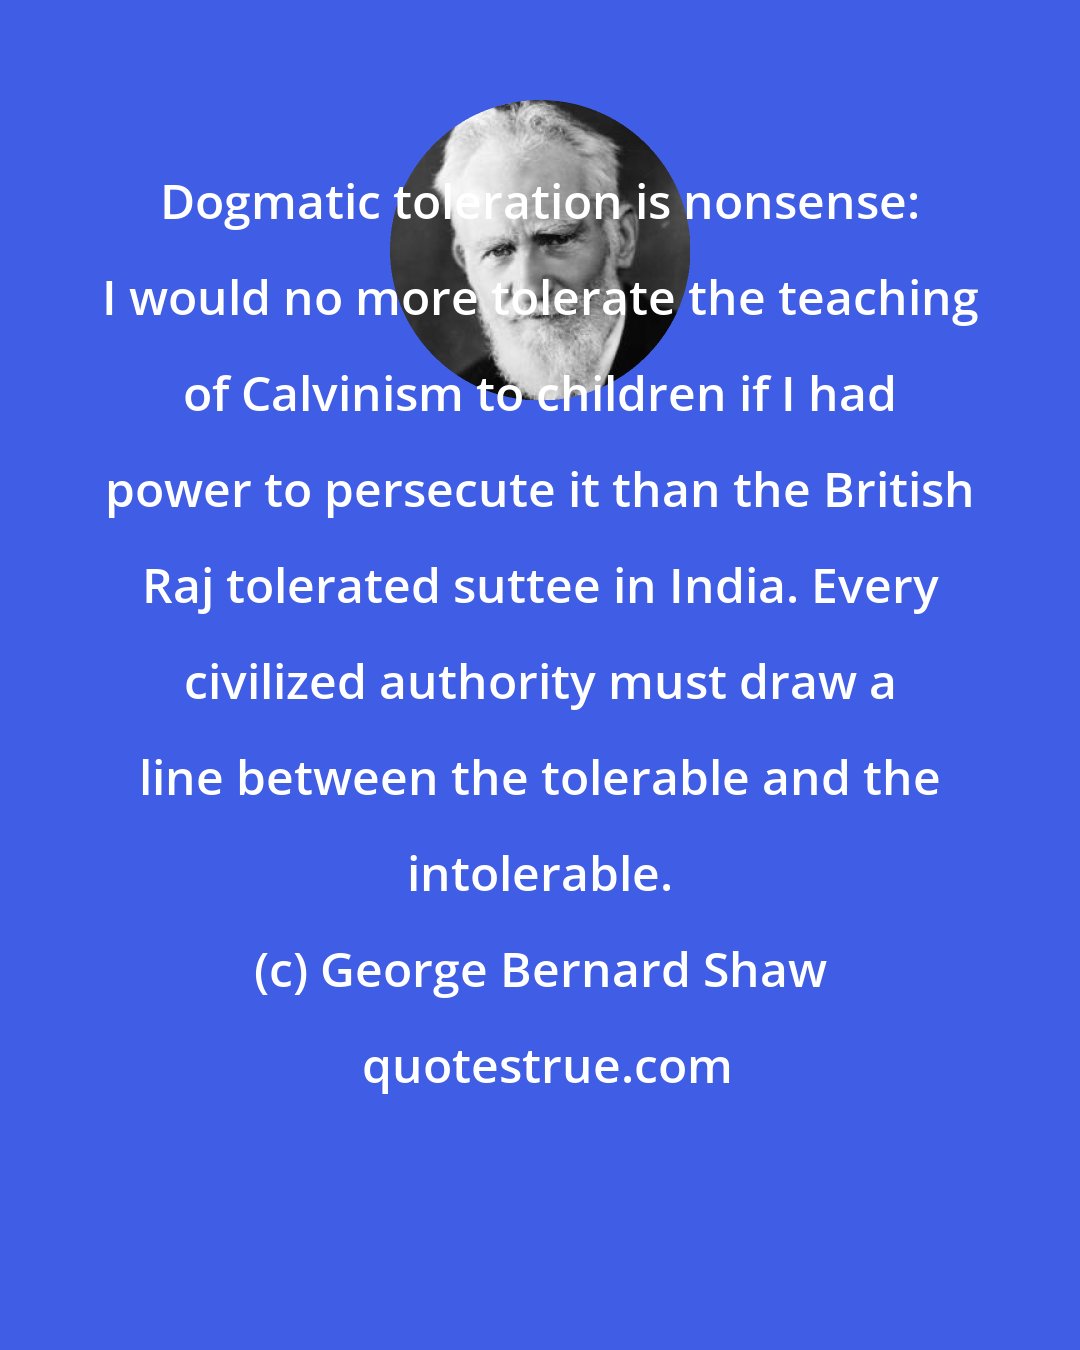 George Bernard Shaw: Dogmatic toleration is nonsense: I would no more tolerate the teaching of Calvinism to children if I had power to persecute it than the British Raj tolerated suttee in India. Every civilized authority must draw a line between the tolerable and the intolerable.